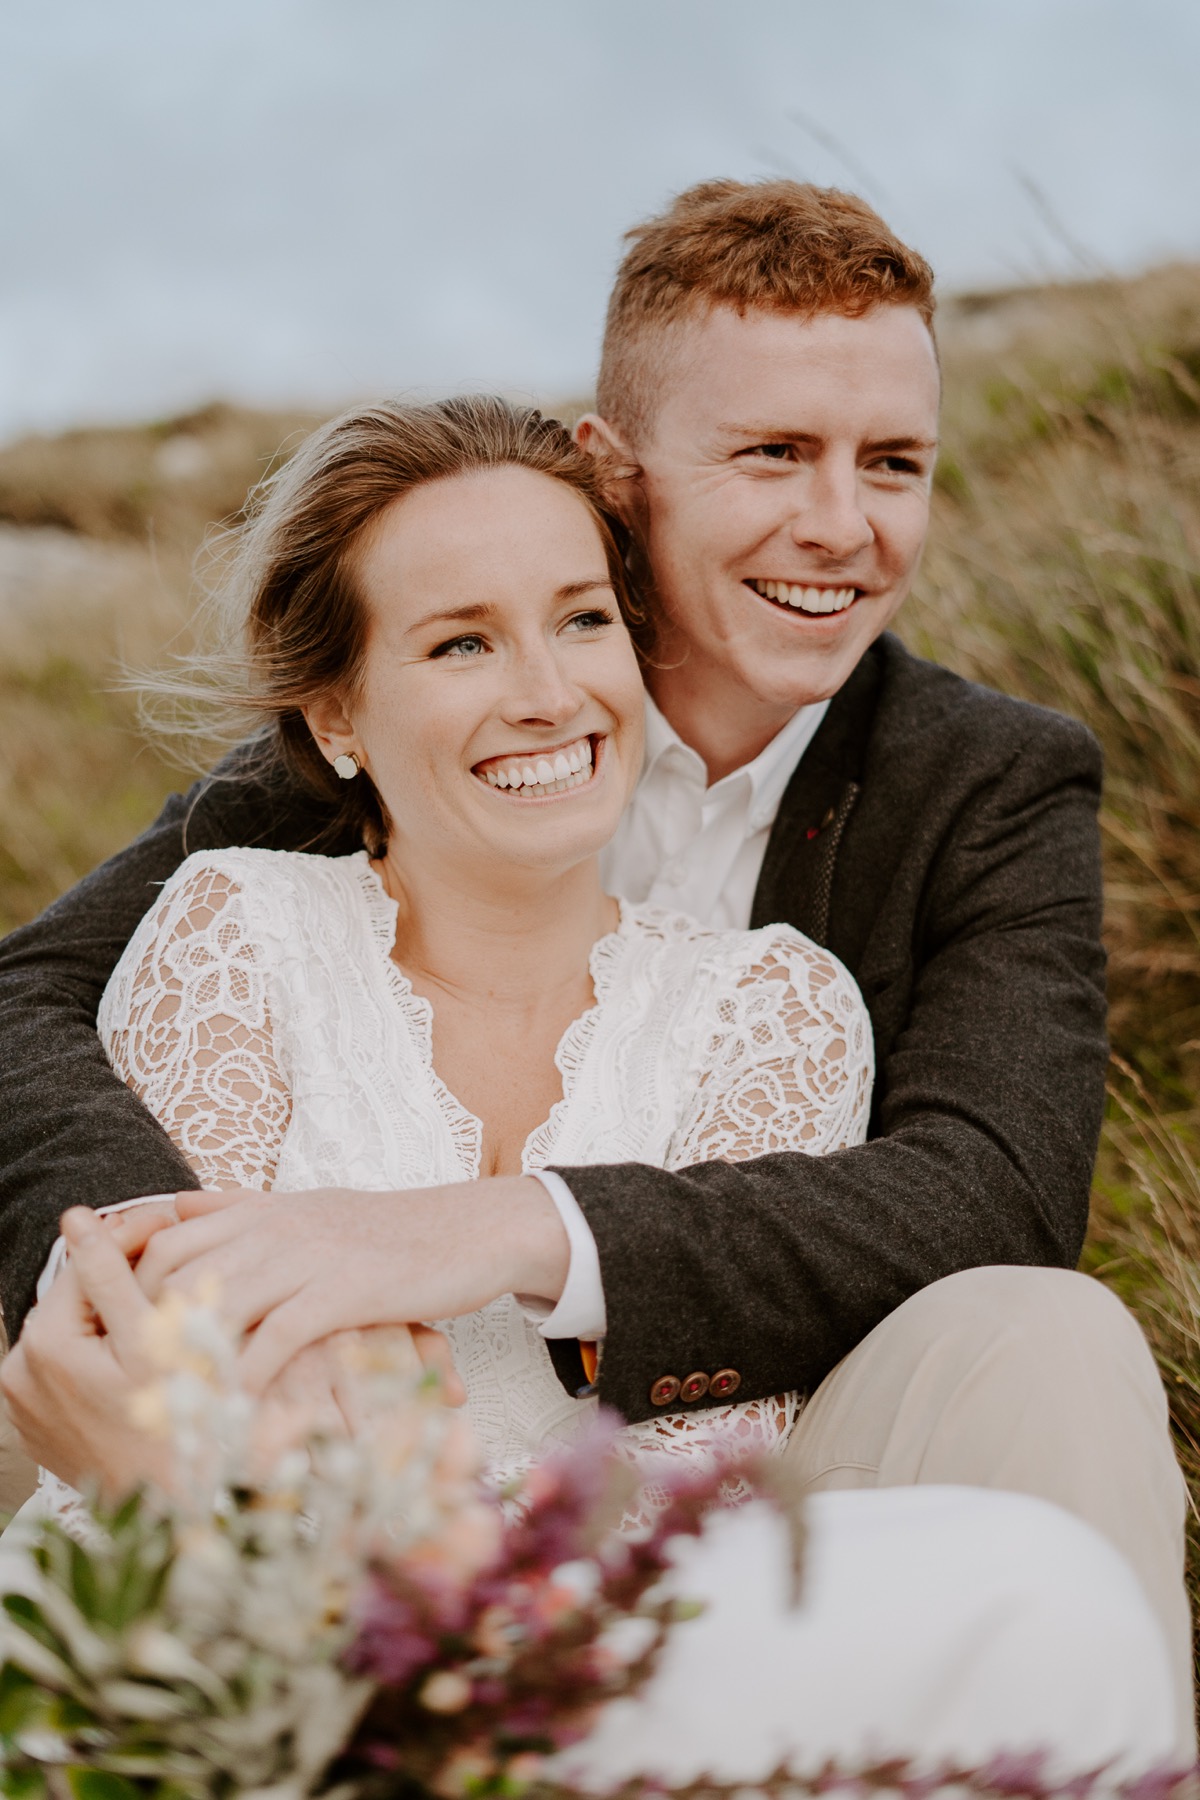 Bride and groom sit together in grass and smile